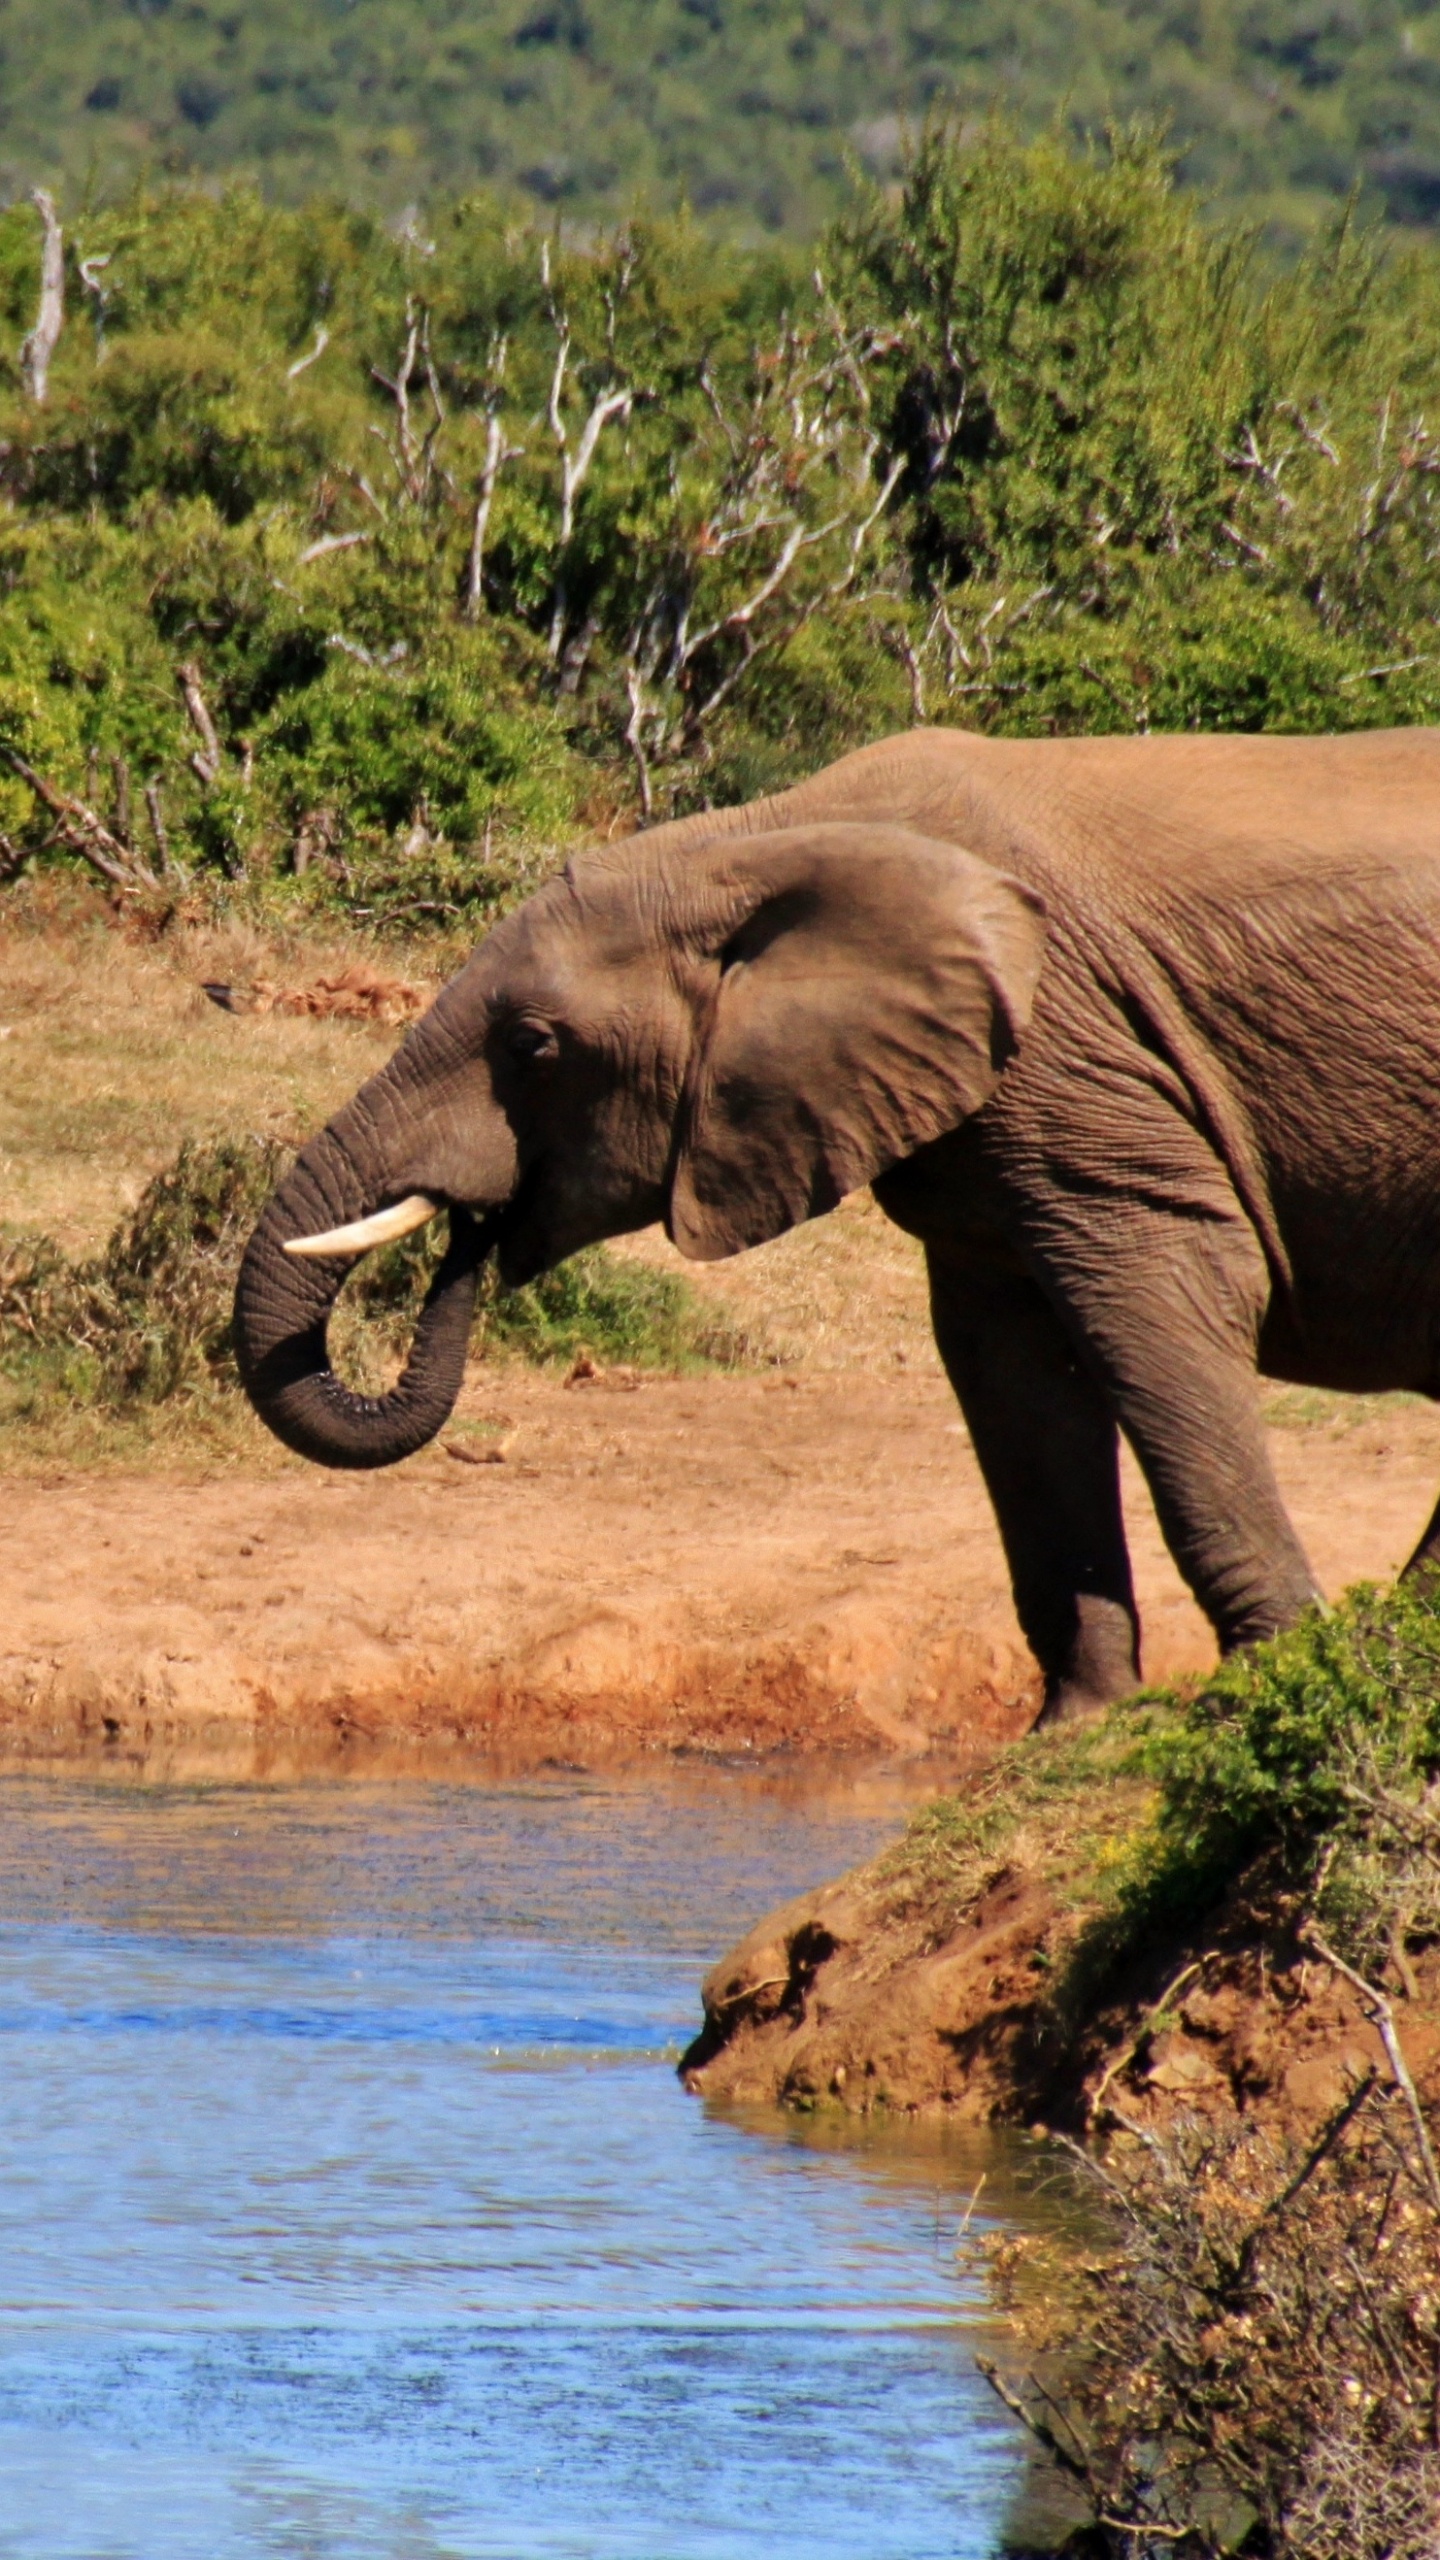 Elephant Drinking Water on River During Daytime. Wallpaper in 1440x2560 Resolution